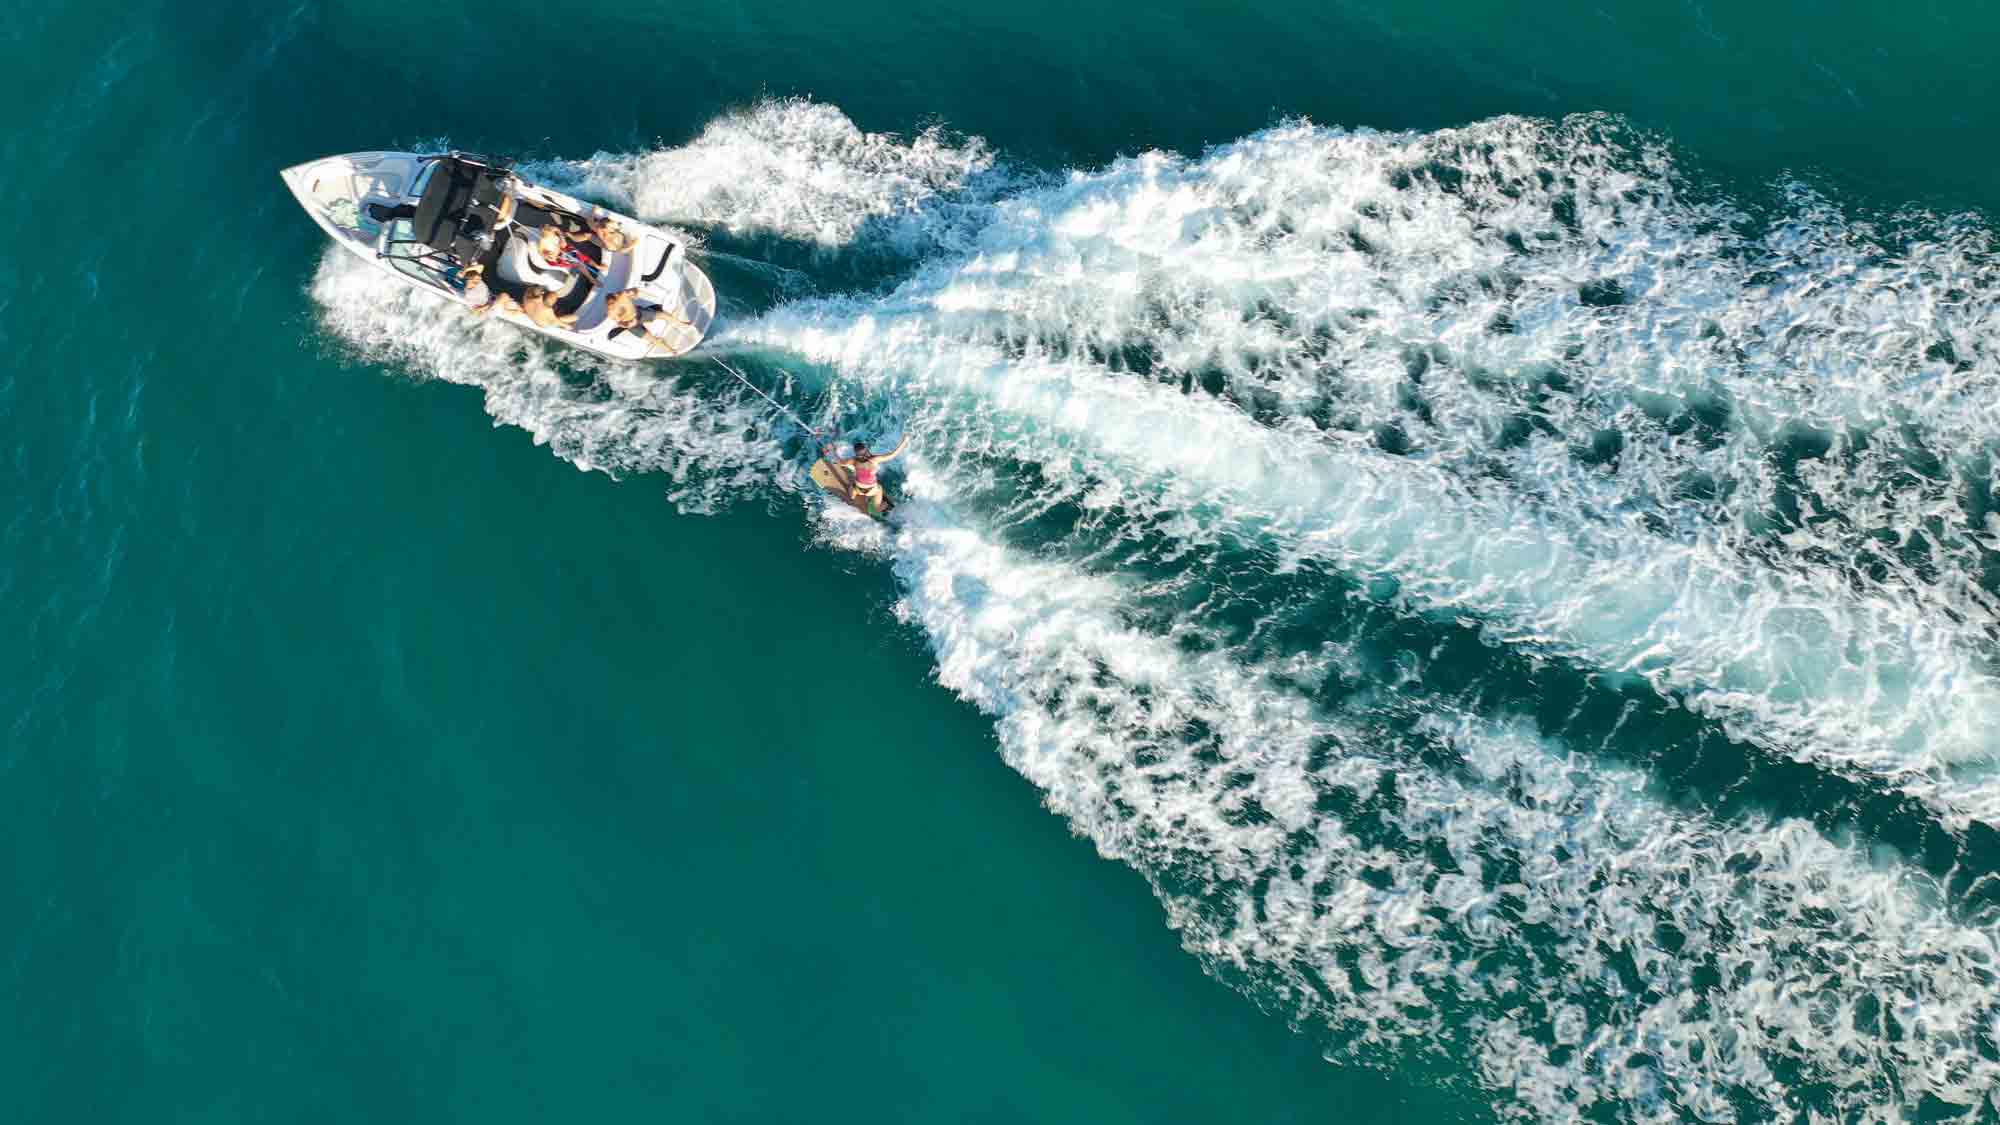 10 Best Water Sports Activities With Yacht Rentals in Miami